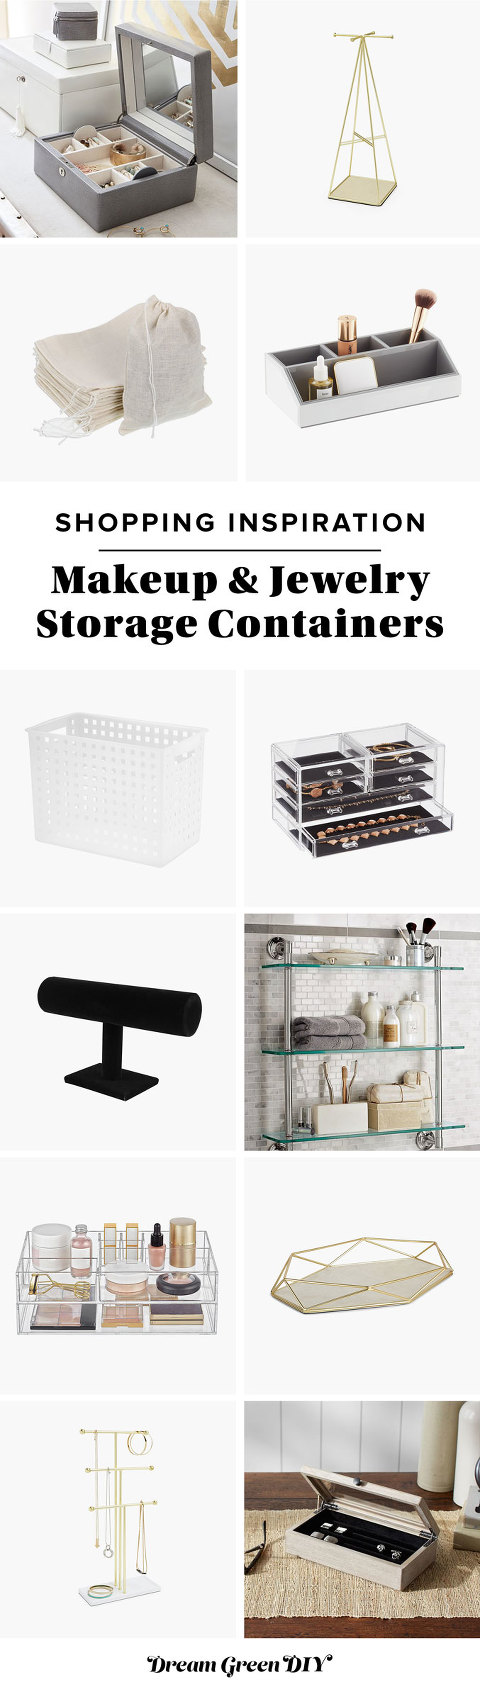 Makeup & Jewelry Storage Containers